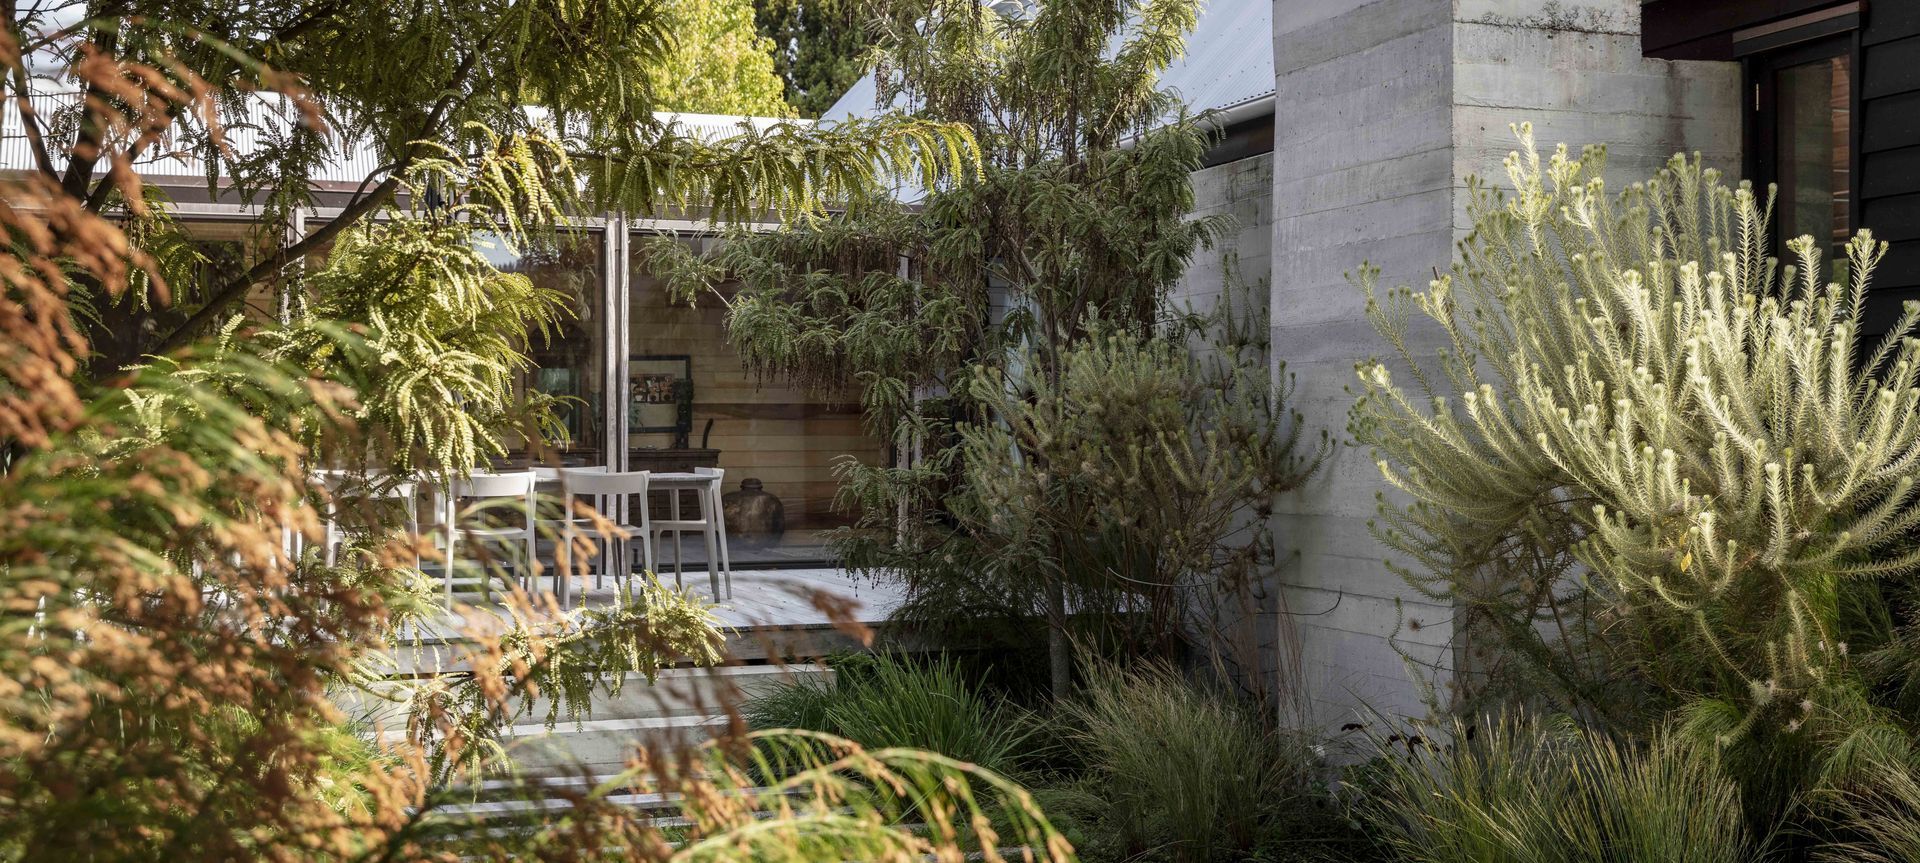 Courtyard garden on the Point Wells estuary combines native reeds with South African shrubs. Designer: Andy Hamilton. Photo: Duncan Innes.